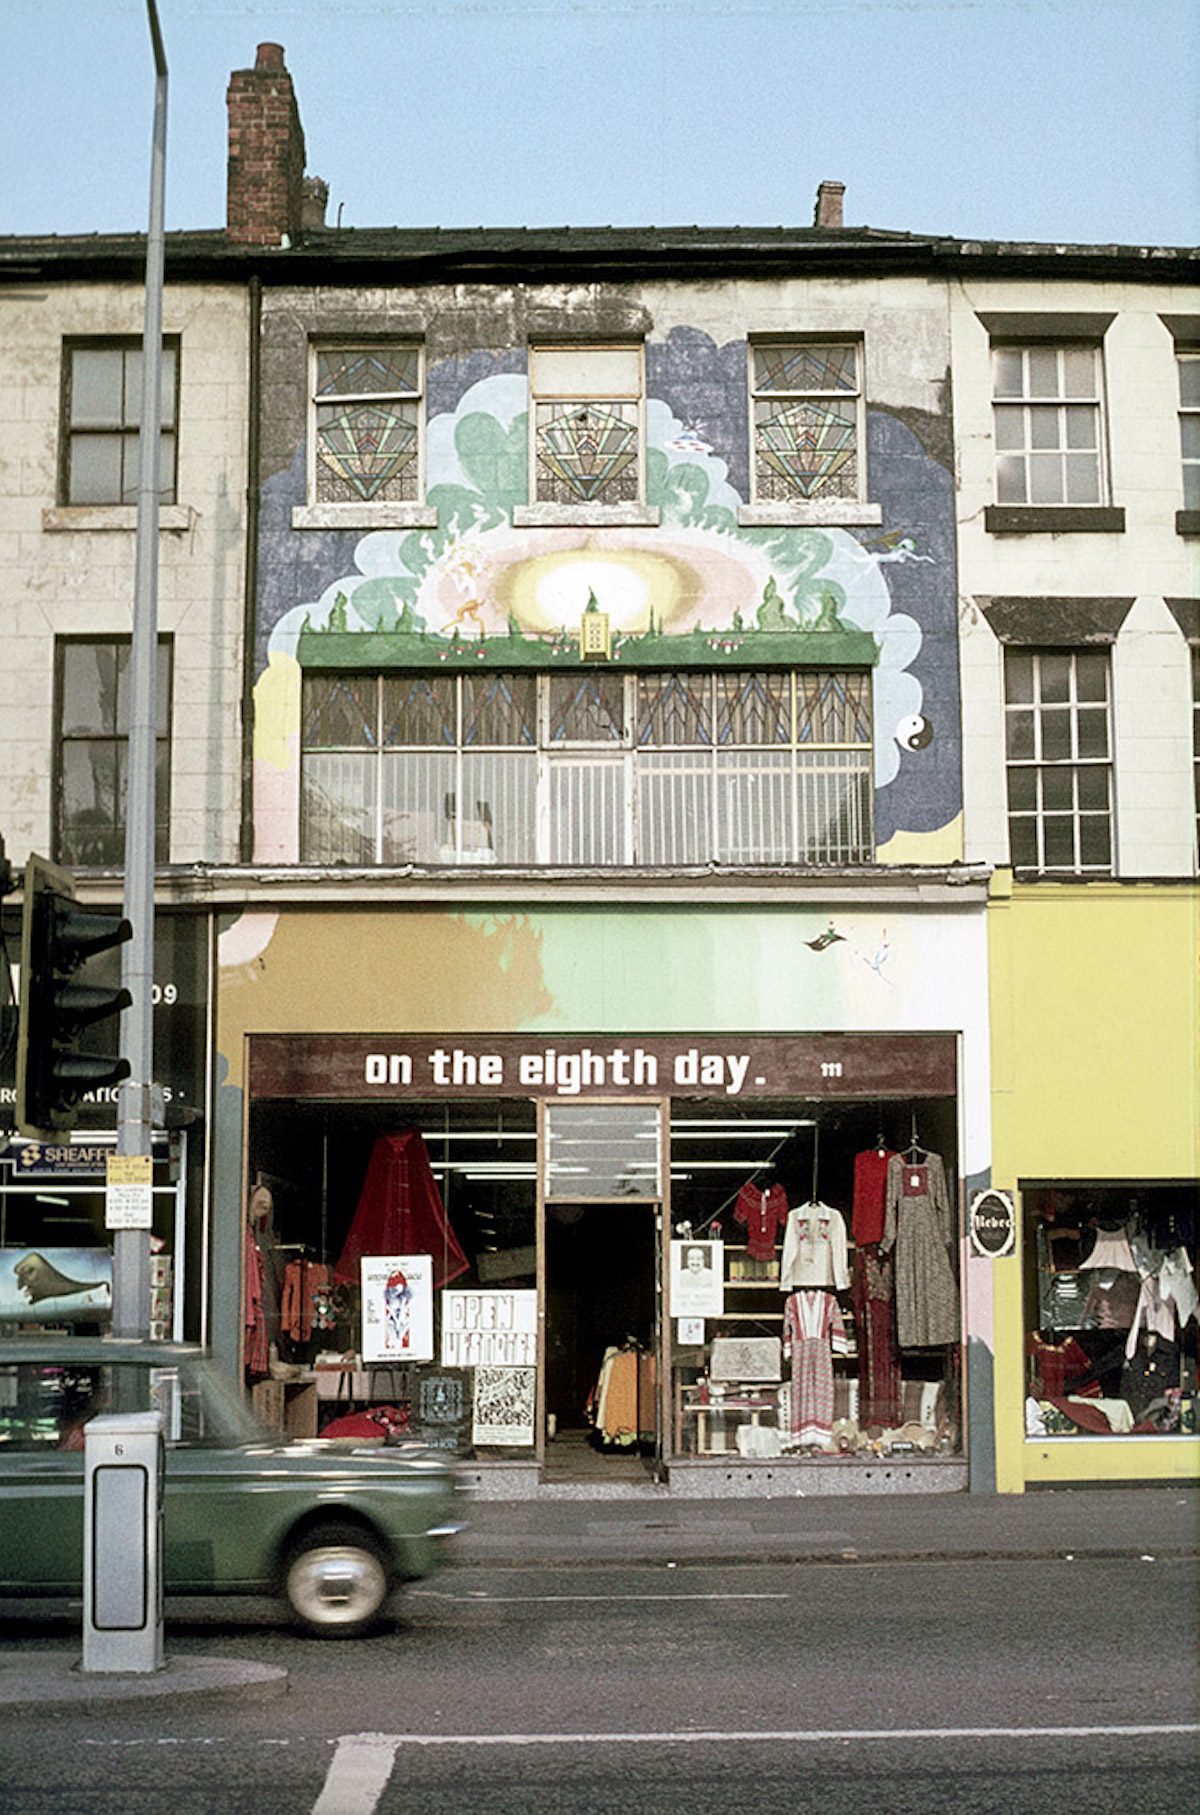 The On the Eighth Day shop at 111 Oxford Road, photographed around 1973.